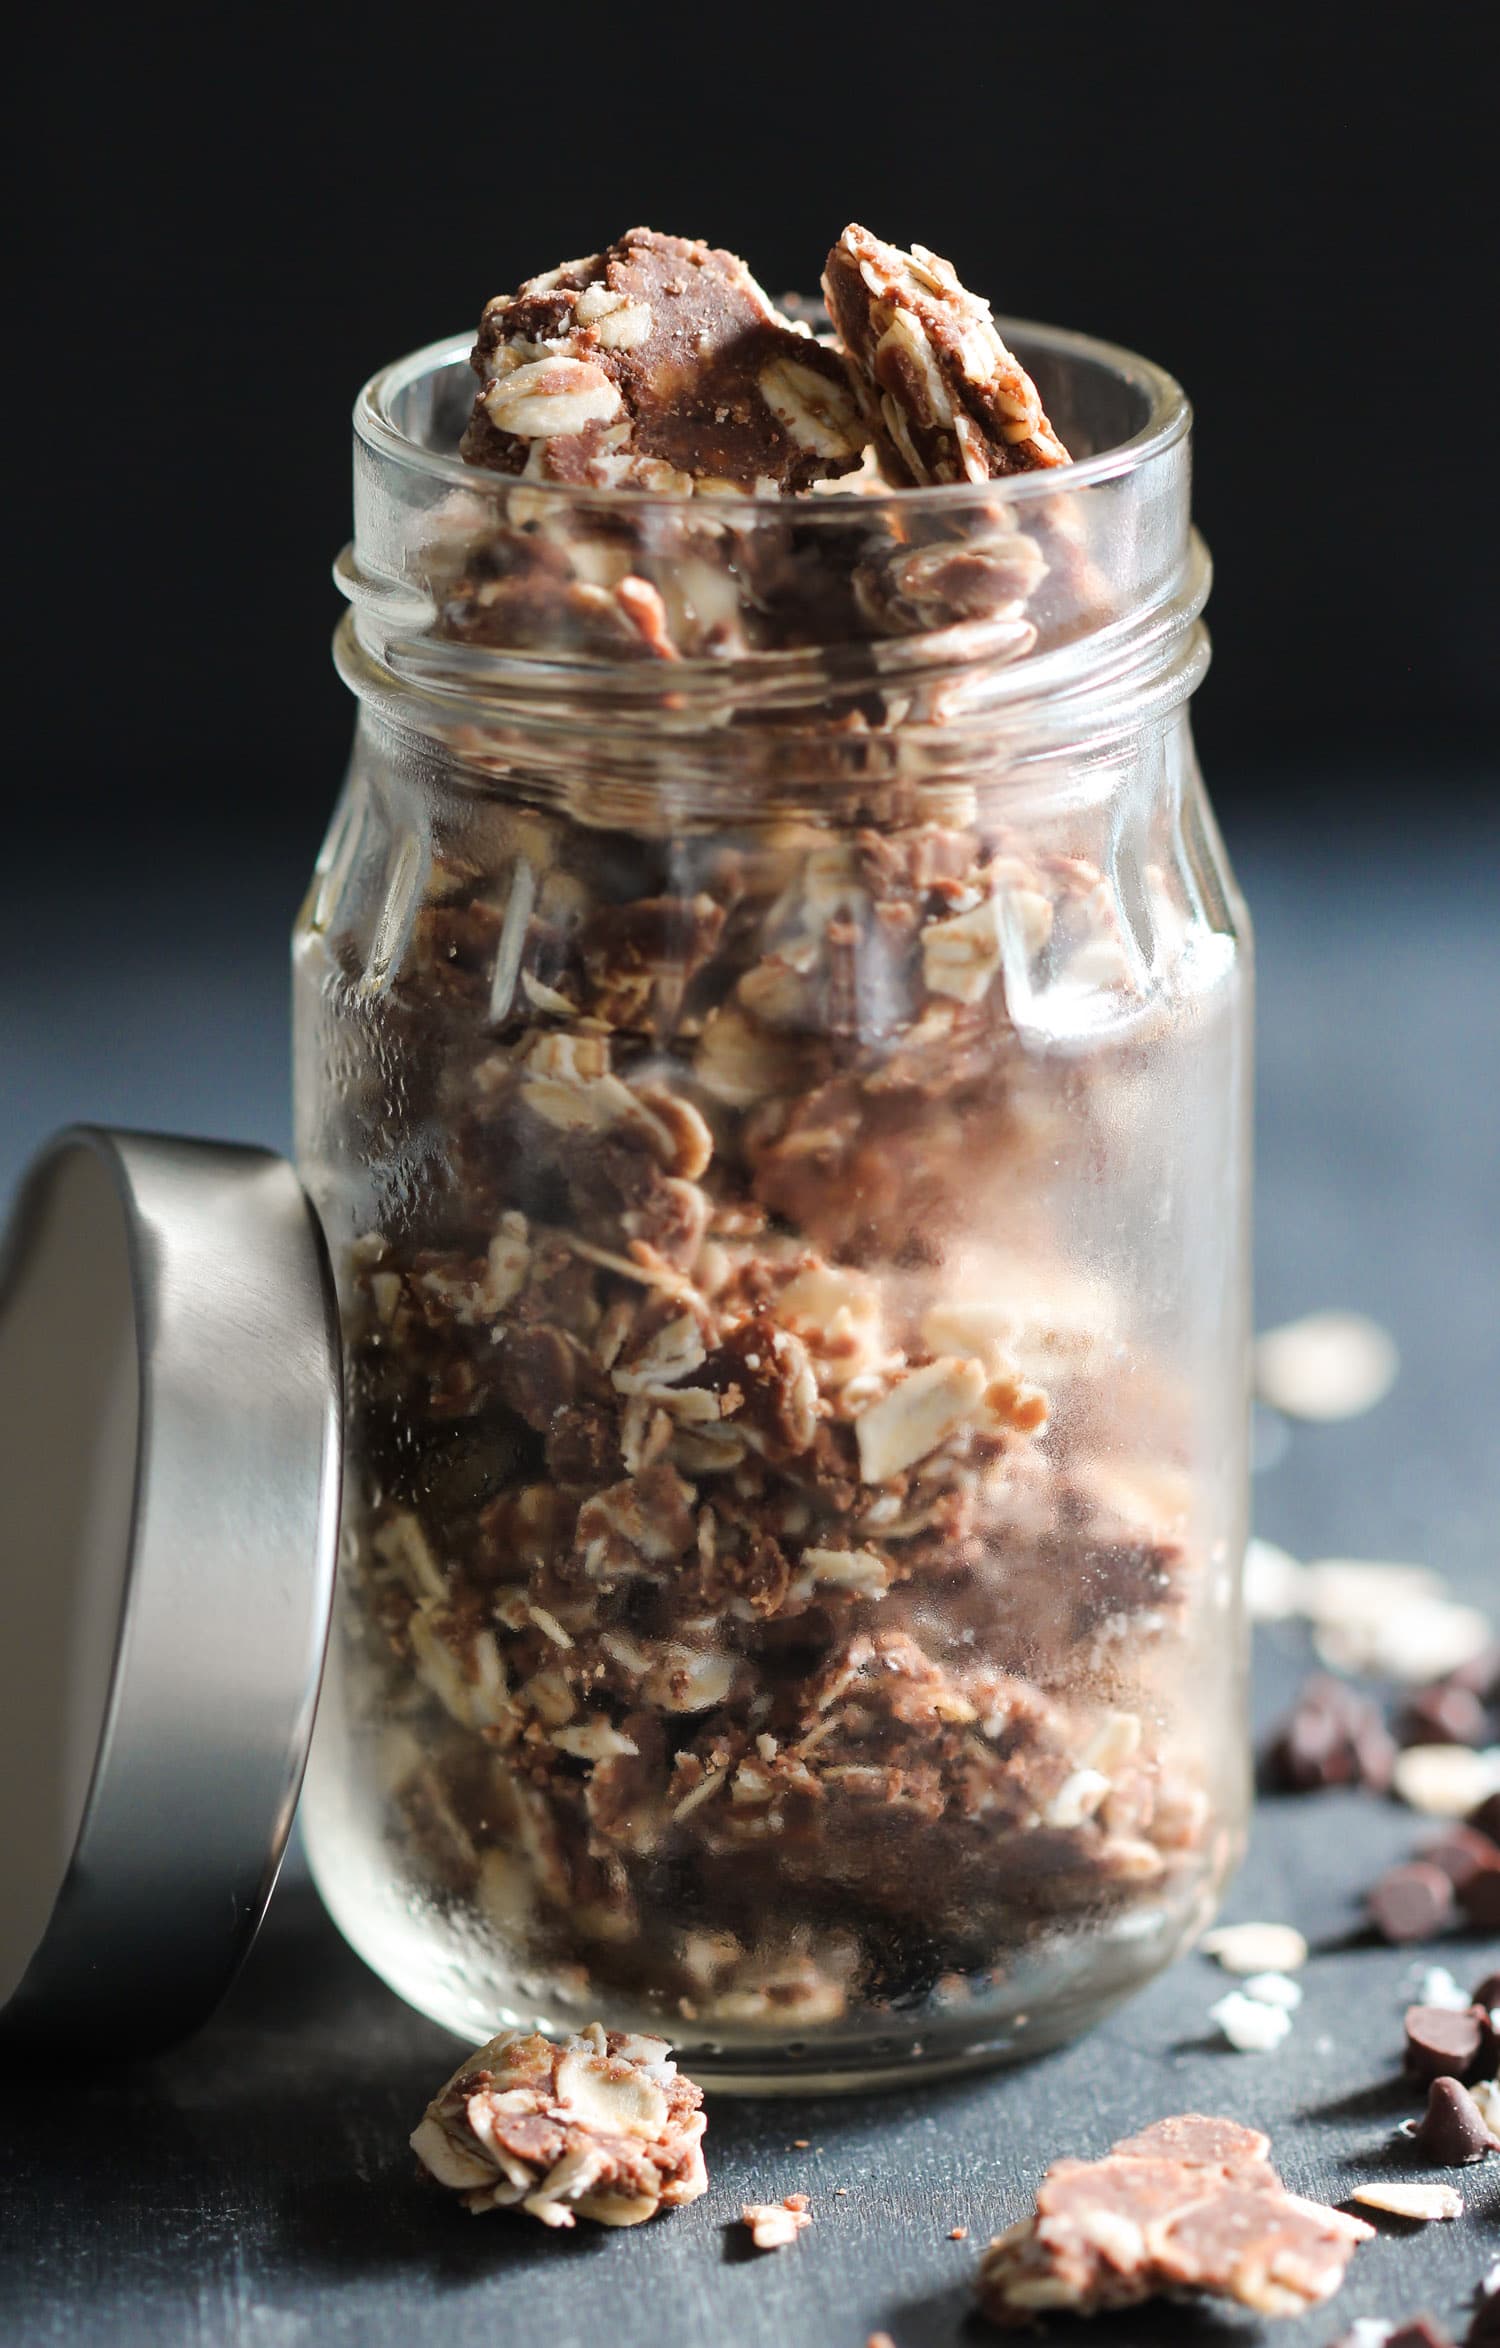 These Healthy Chocolate Coconut Granola Clusters are bite-sized flavor bombs that won't crumble and fall apart like regular granola. So enjoy your granola, MESS FREE! I love this easy recipe because it's no-bake, sugar free, high protein, gluten free, dairy free, and vegan. Plus, it has less calories and more protein and fiber than storebought granola. Healthy Dessert Recipes with sugar free, low calorie, low fat, low carb, high protein, gluten free, dairy free, vegan, and raw options at the Desserts With Benefits Blog (www.DessertsWithBenefits.com)